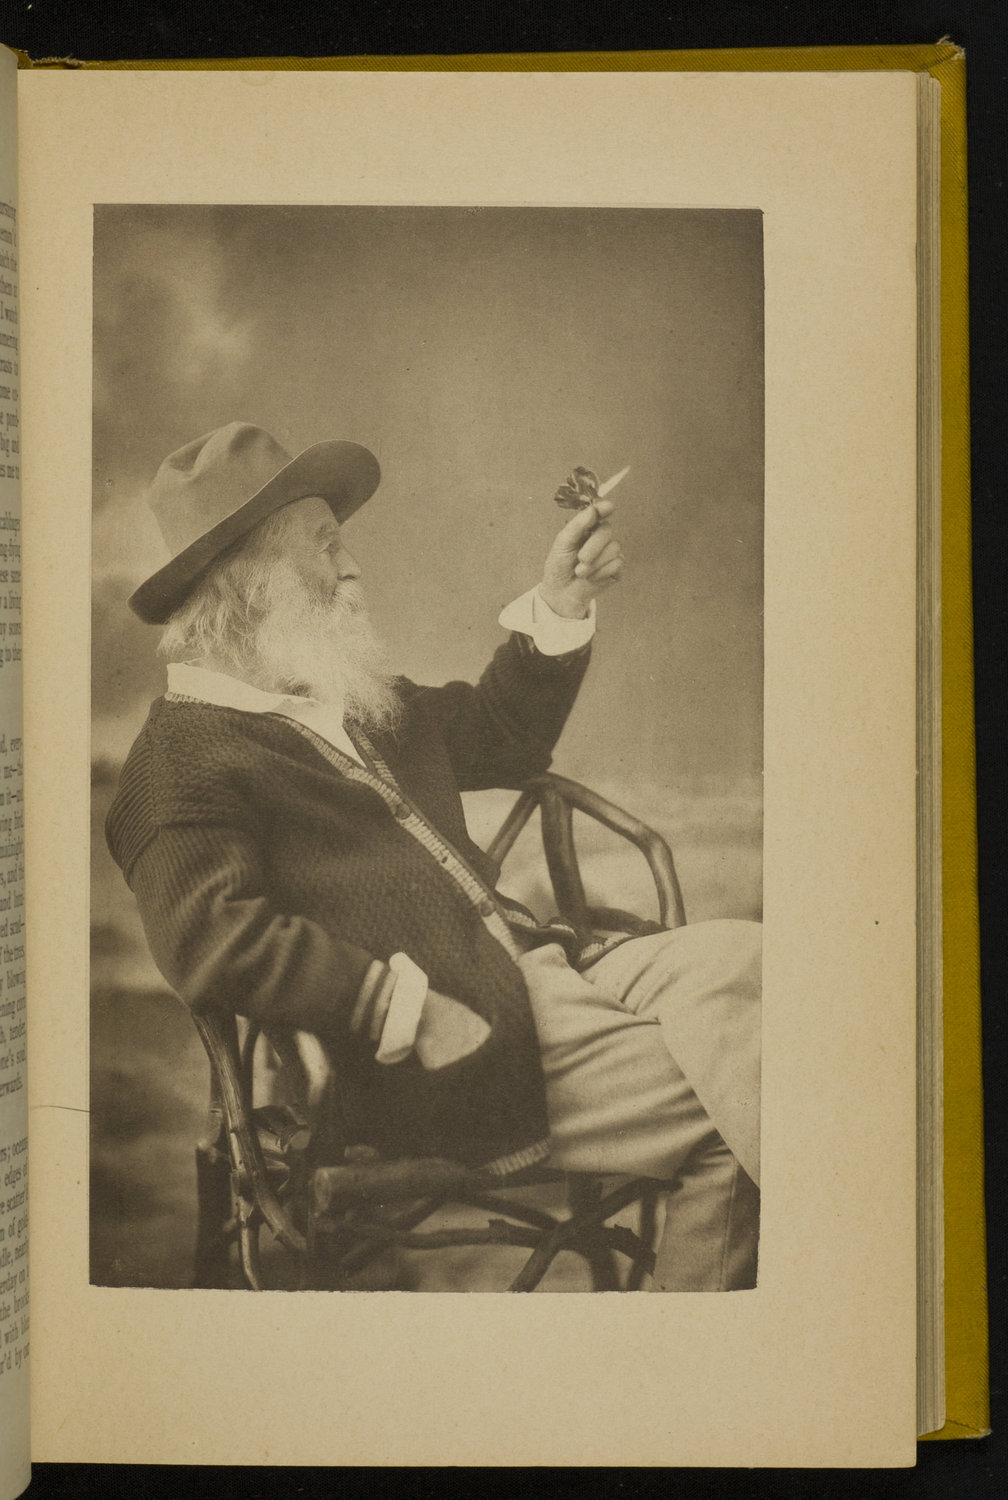 Whitman and Butterfly